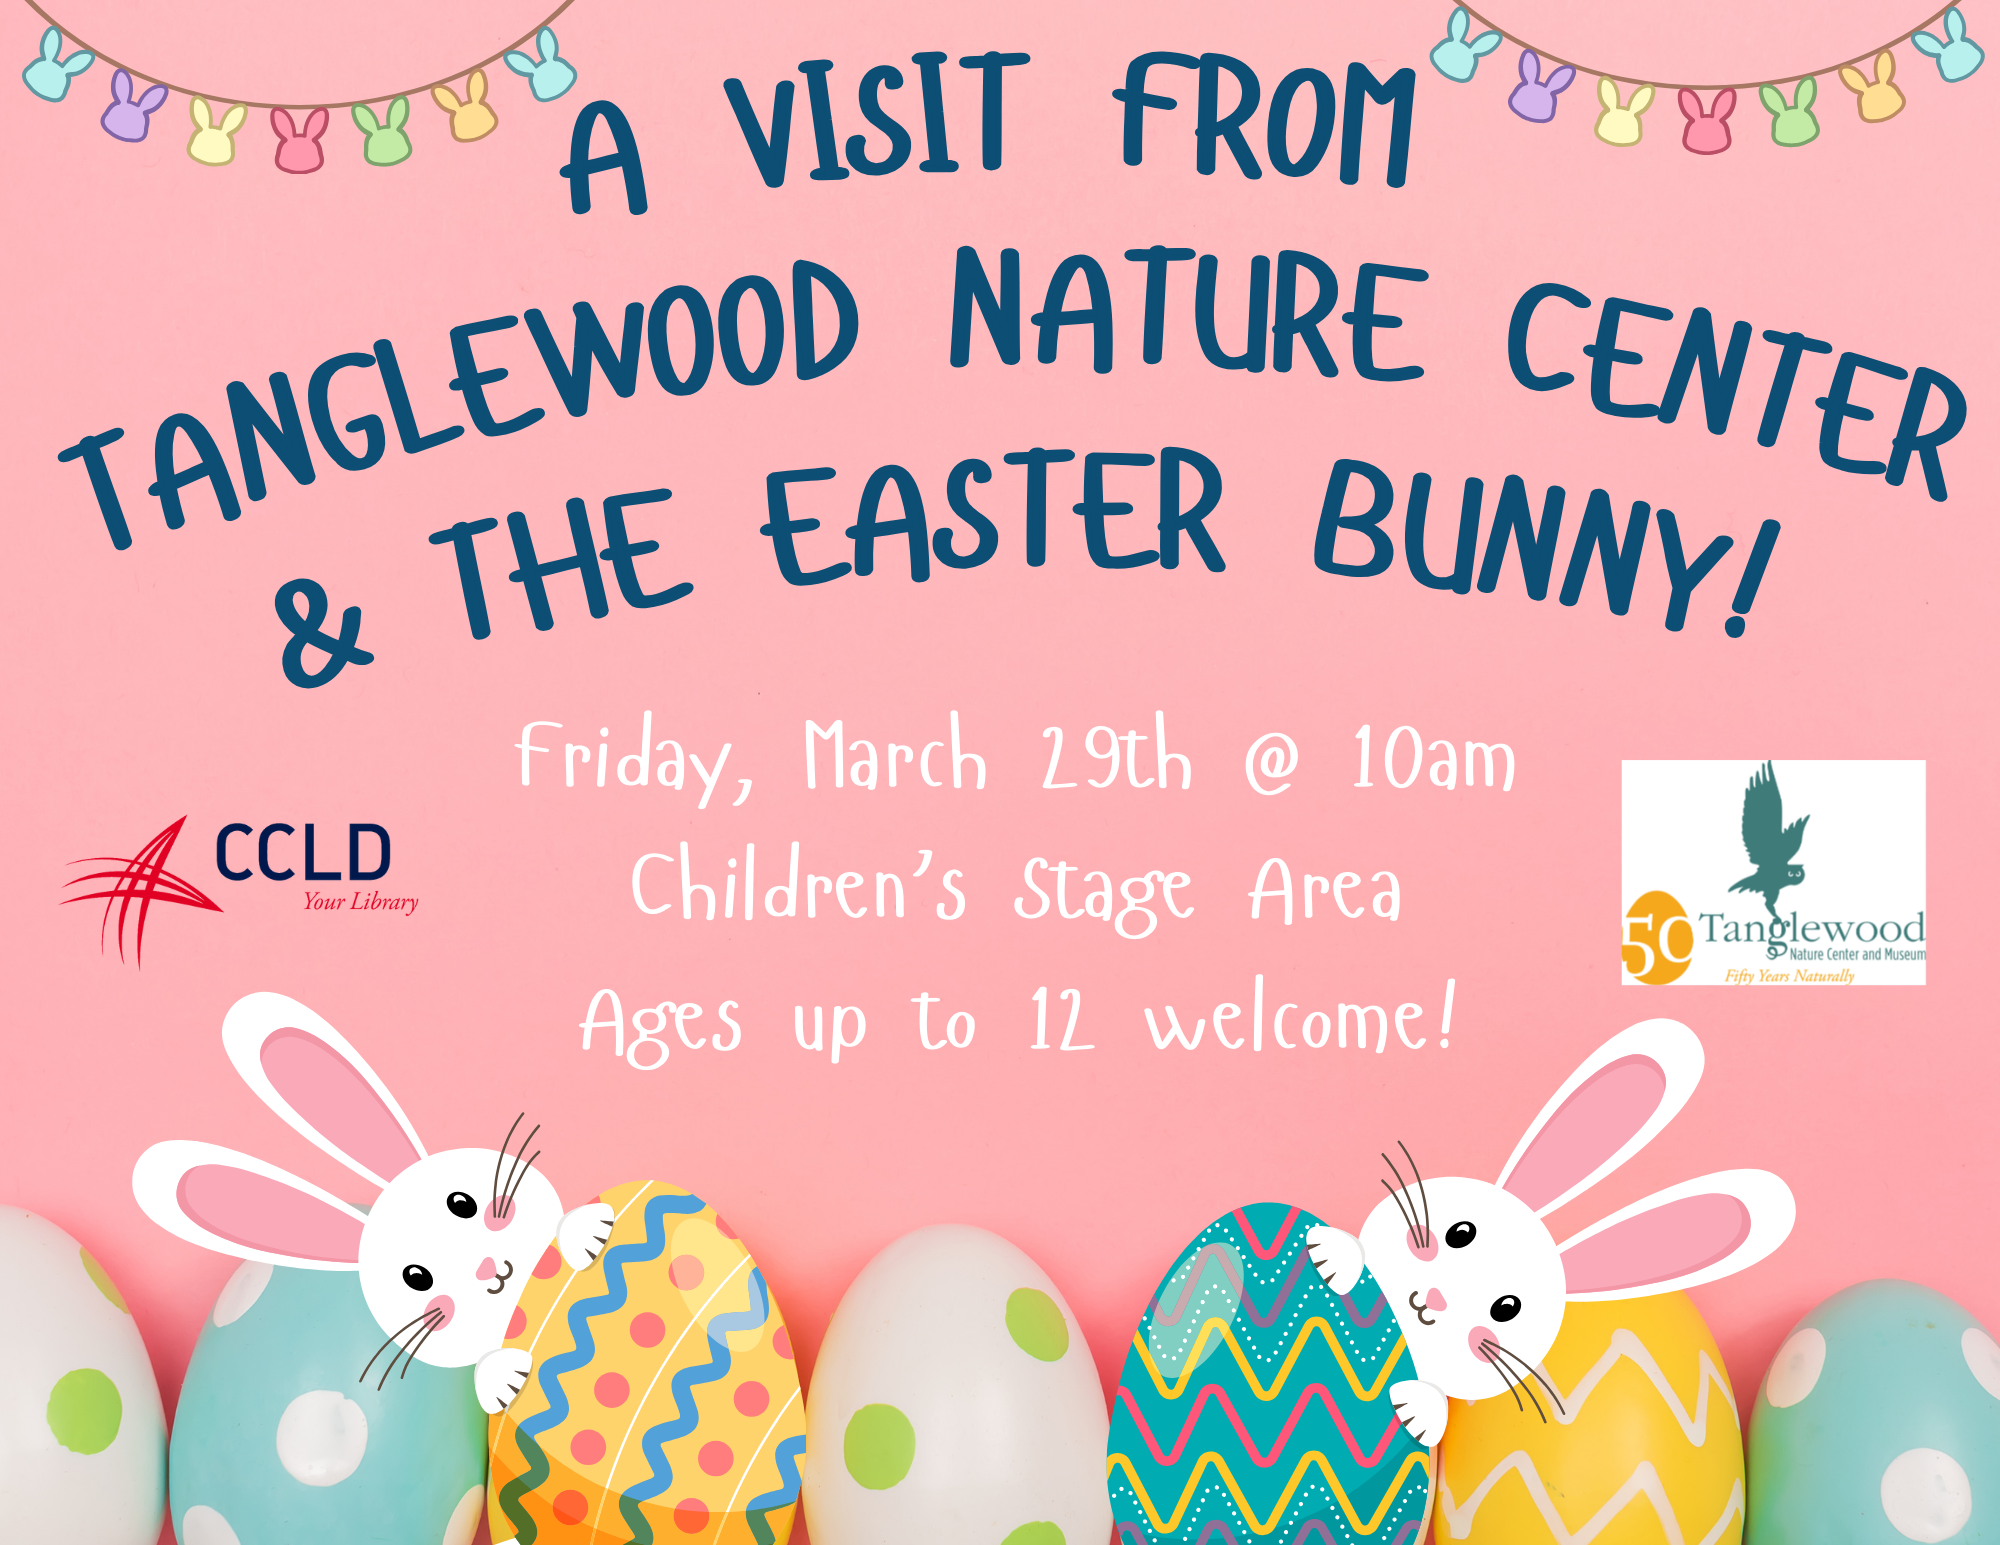 Tanglewood Nature Center is visiting Steele with "Animals That Hatch"! Meet salamanders, turtles, and other hatching animals during this fun-filled 45min program. Afterwards, we will have a visit from the Easter Bunny!